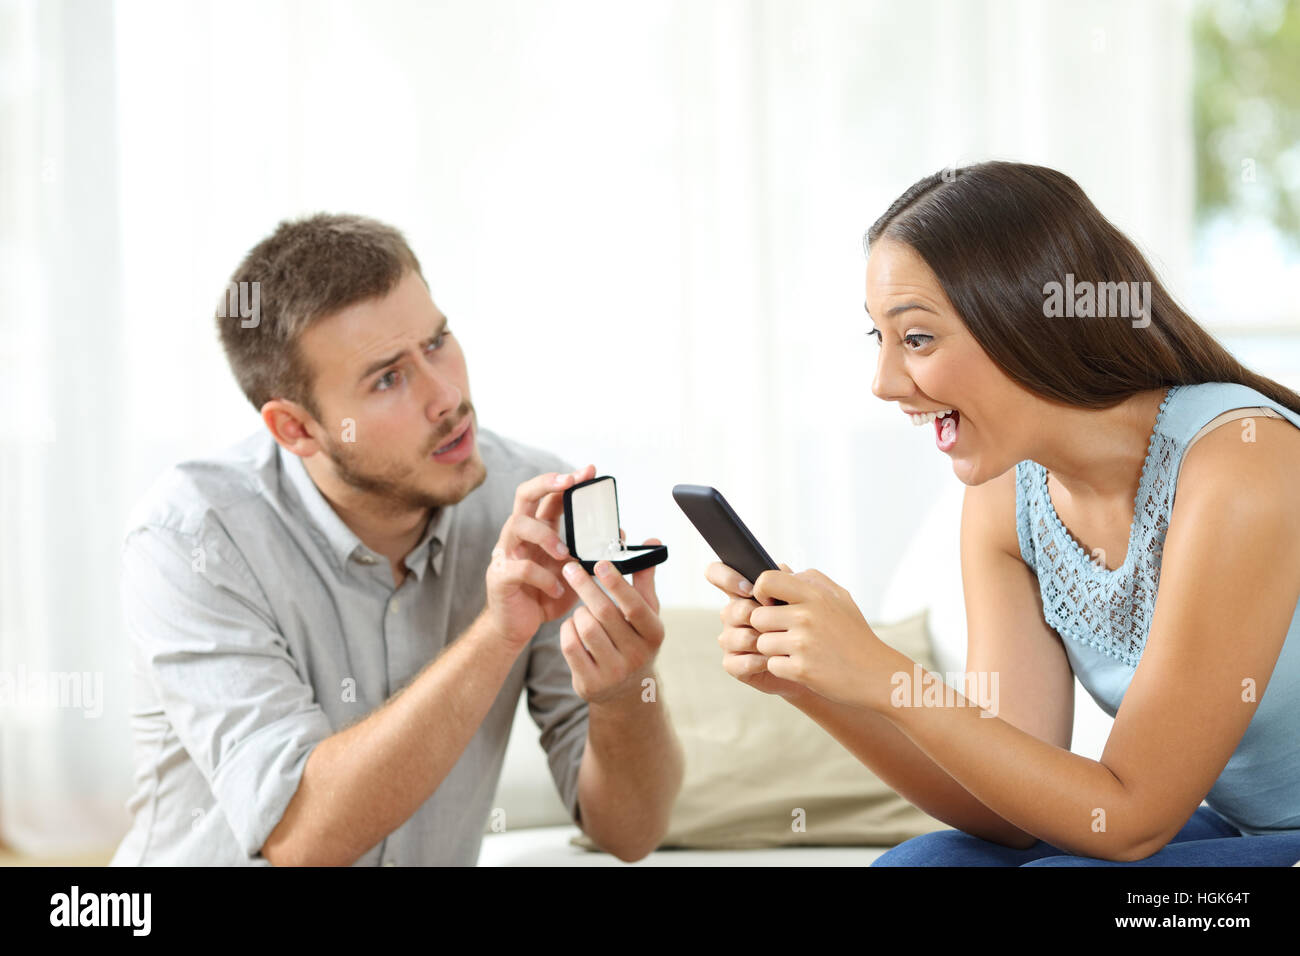 Amazed woman using a smart phone ignoring a marriage proposal of her worried boyfriend at home Stock Photo